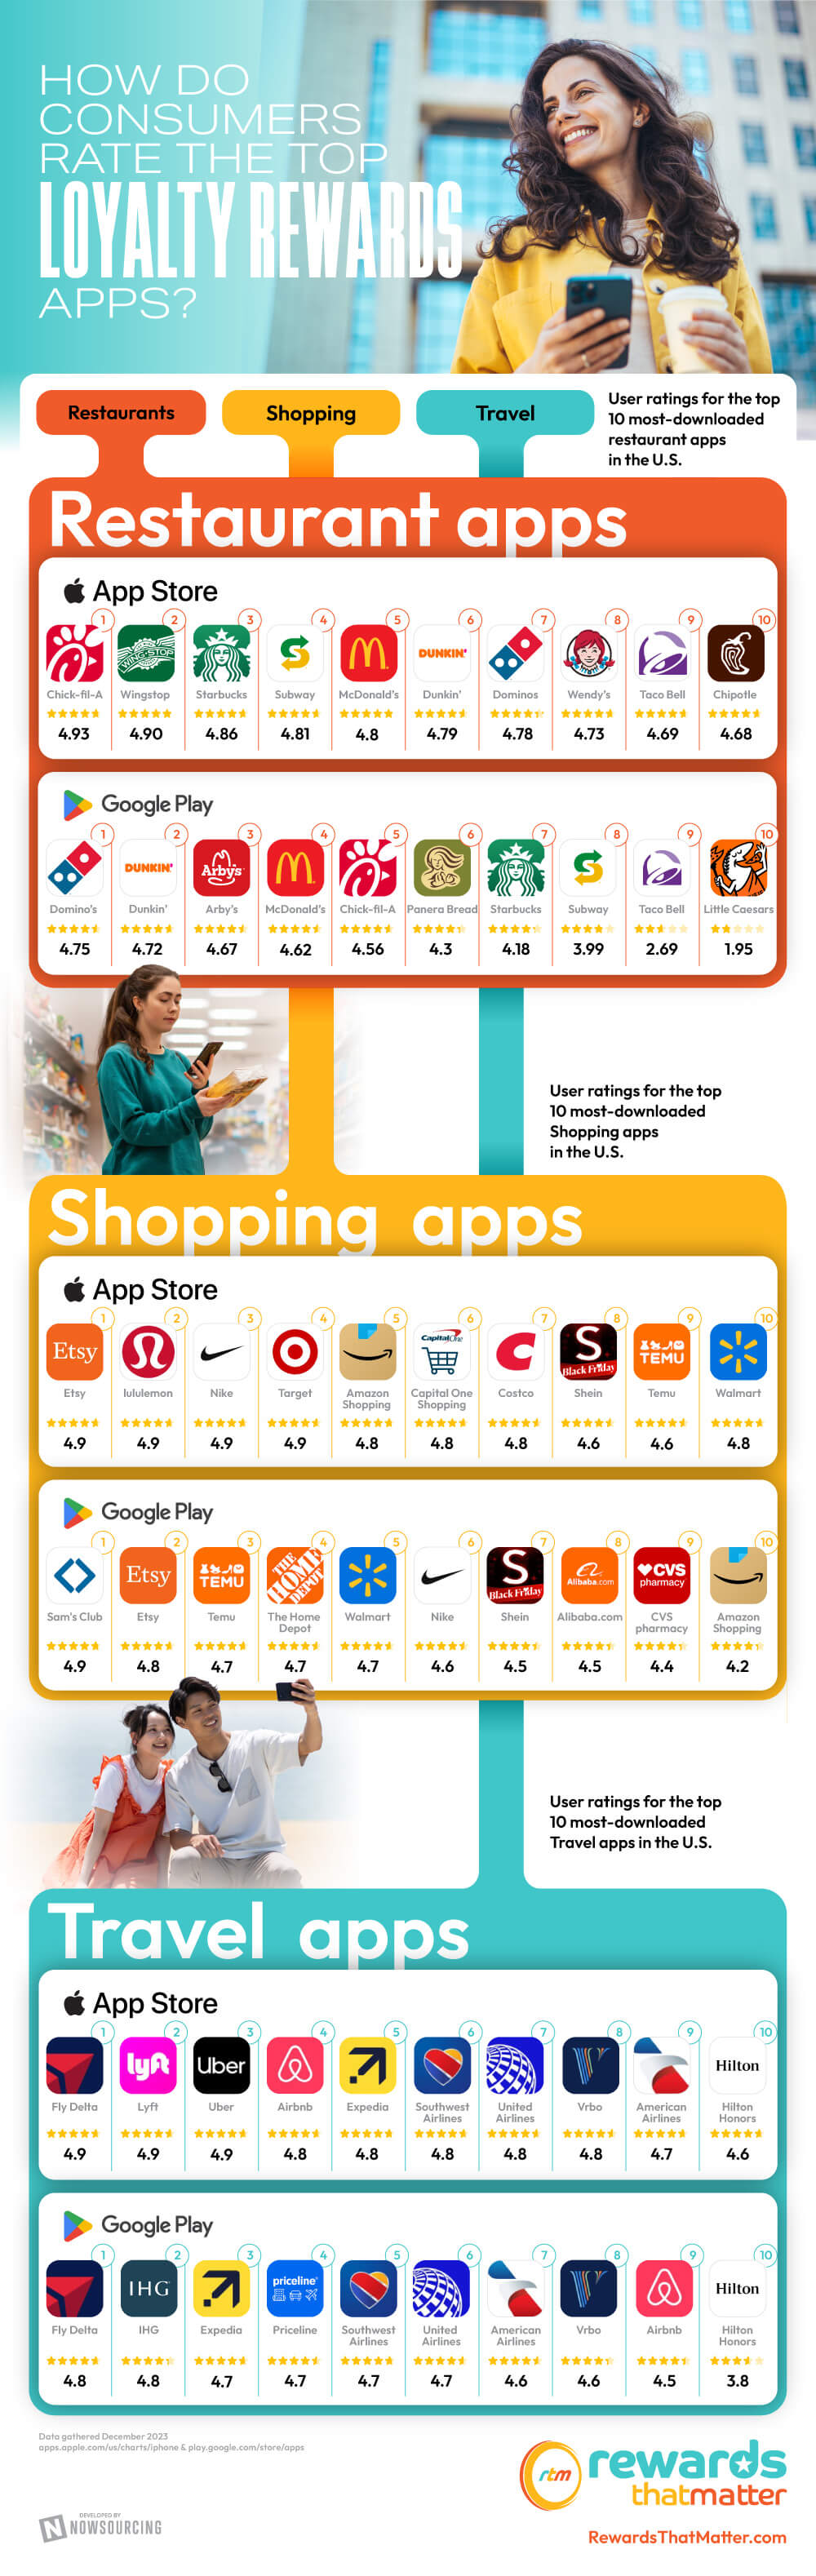 How Do Consumers Rate The Top Loyalty Rewards Apps (Infographic)